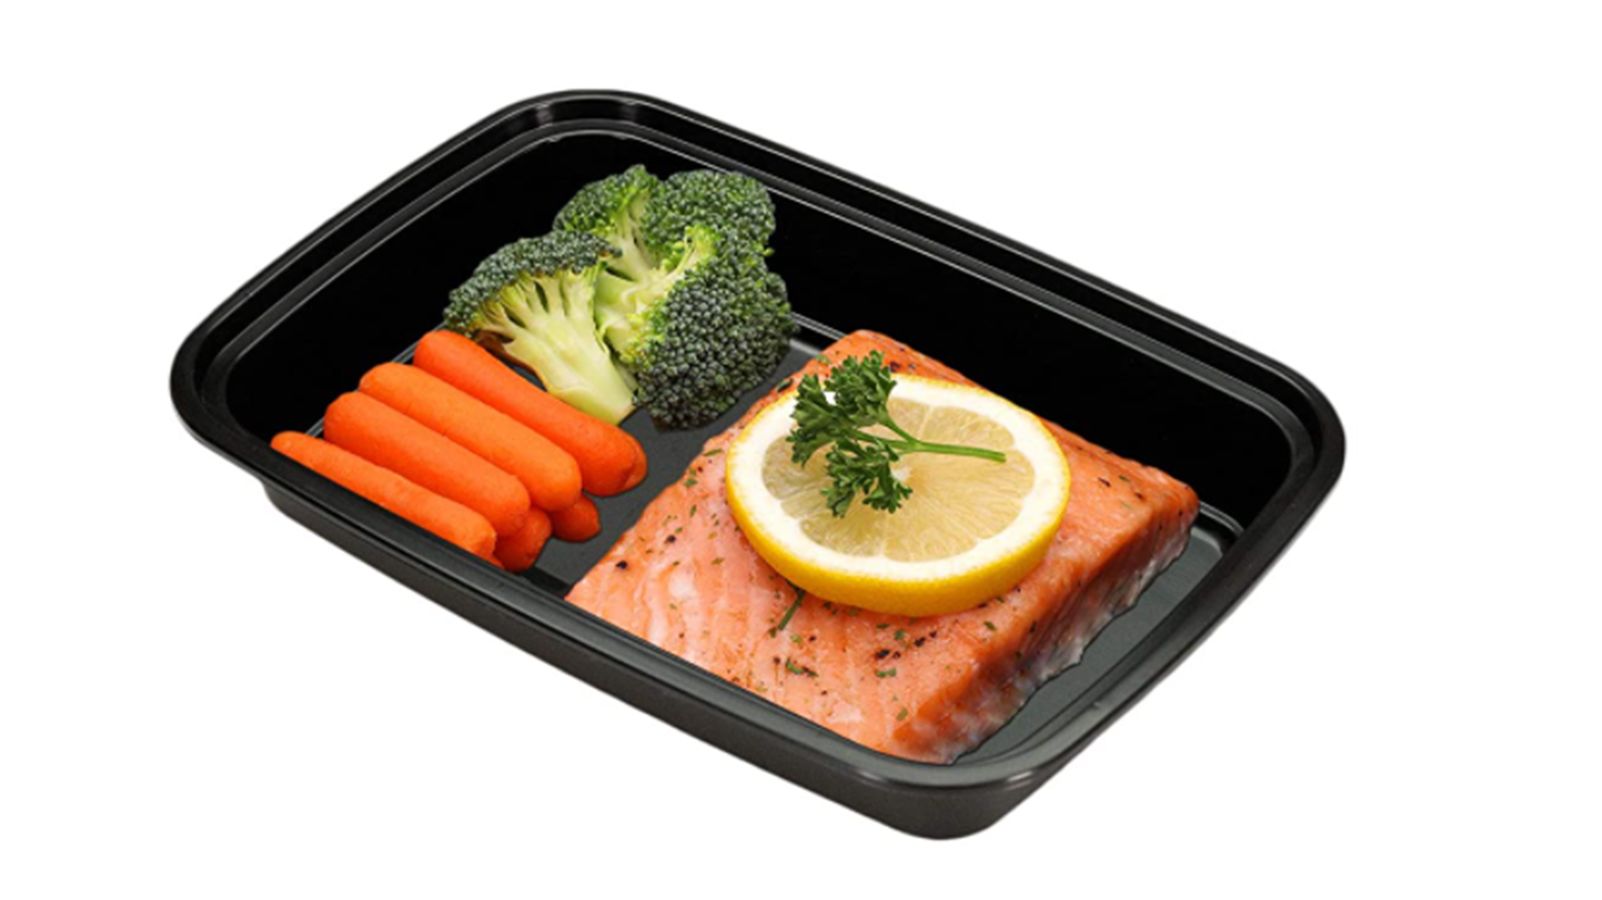 https://media.cnn.com/api/v1/images/stellar/prod/210930103209-best-meal-prep-containers-freshware-meal-prep-containers.jpg?q=w_1602,h_900,x_0,y_0,c_fill